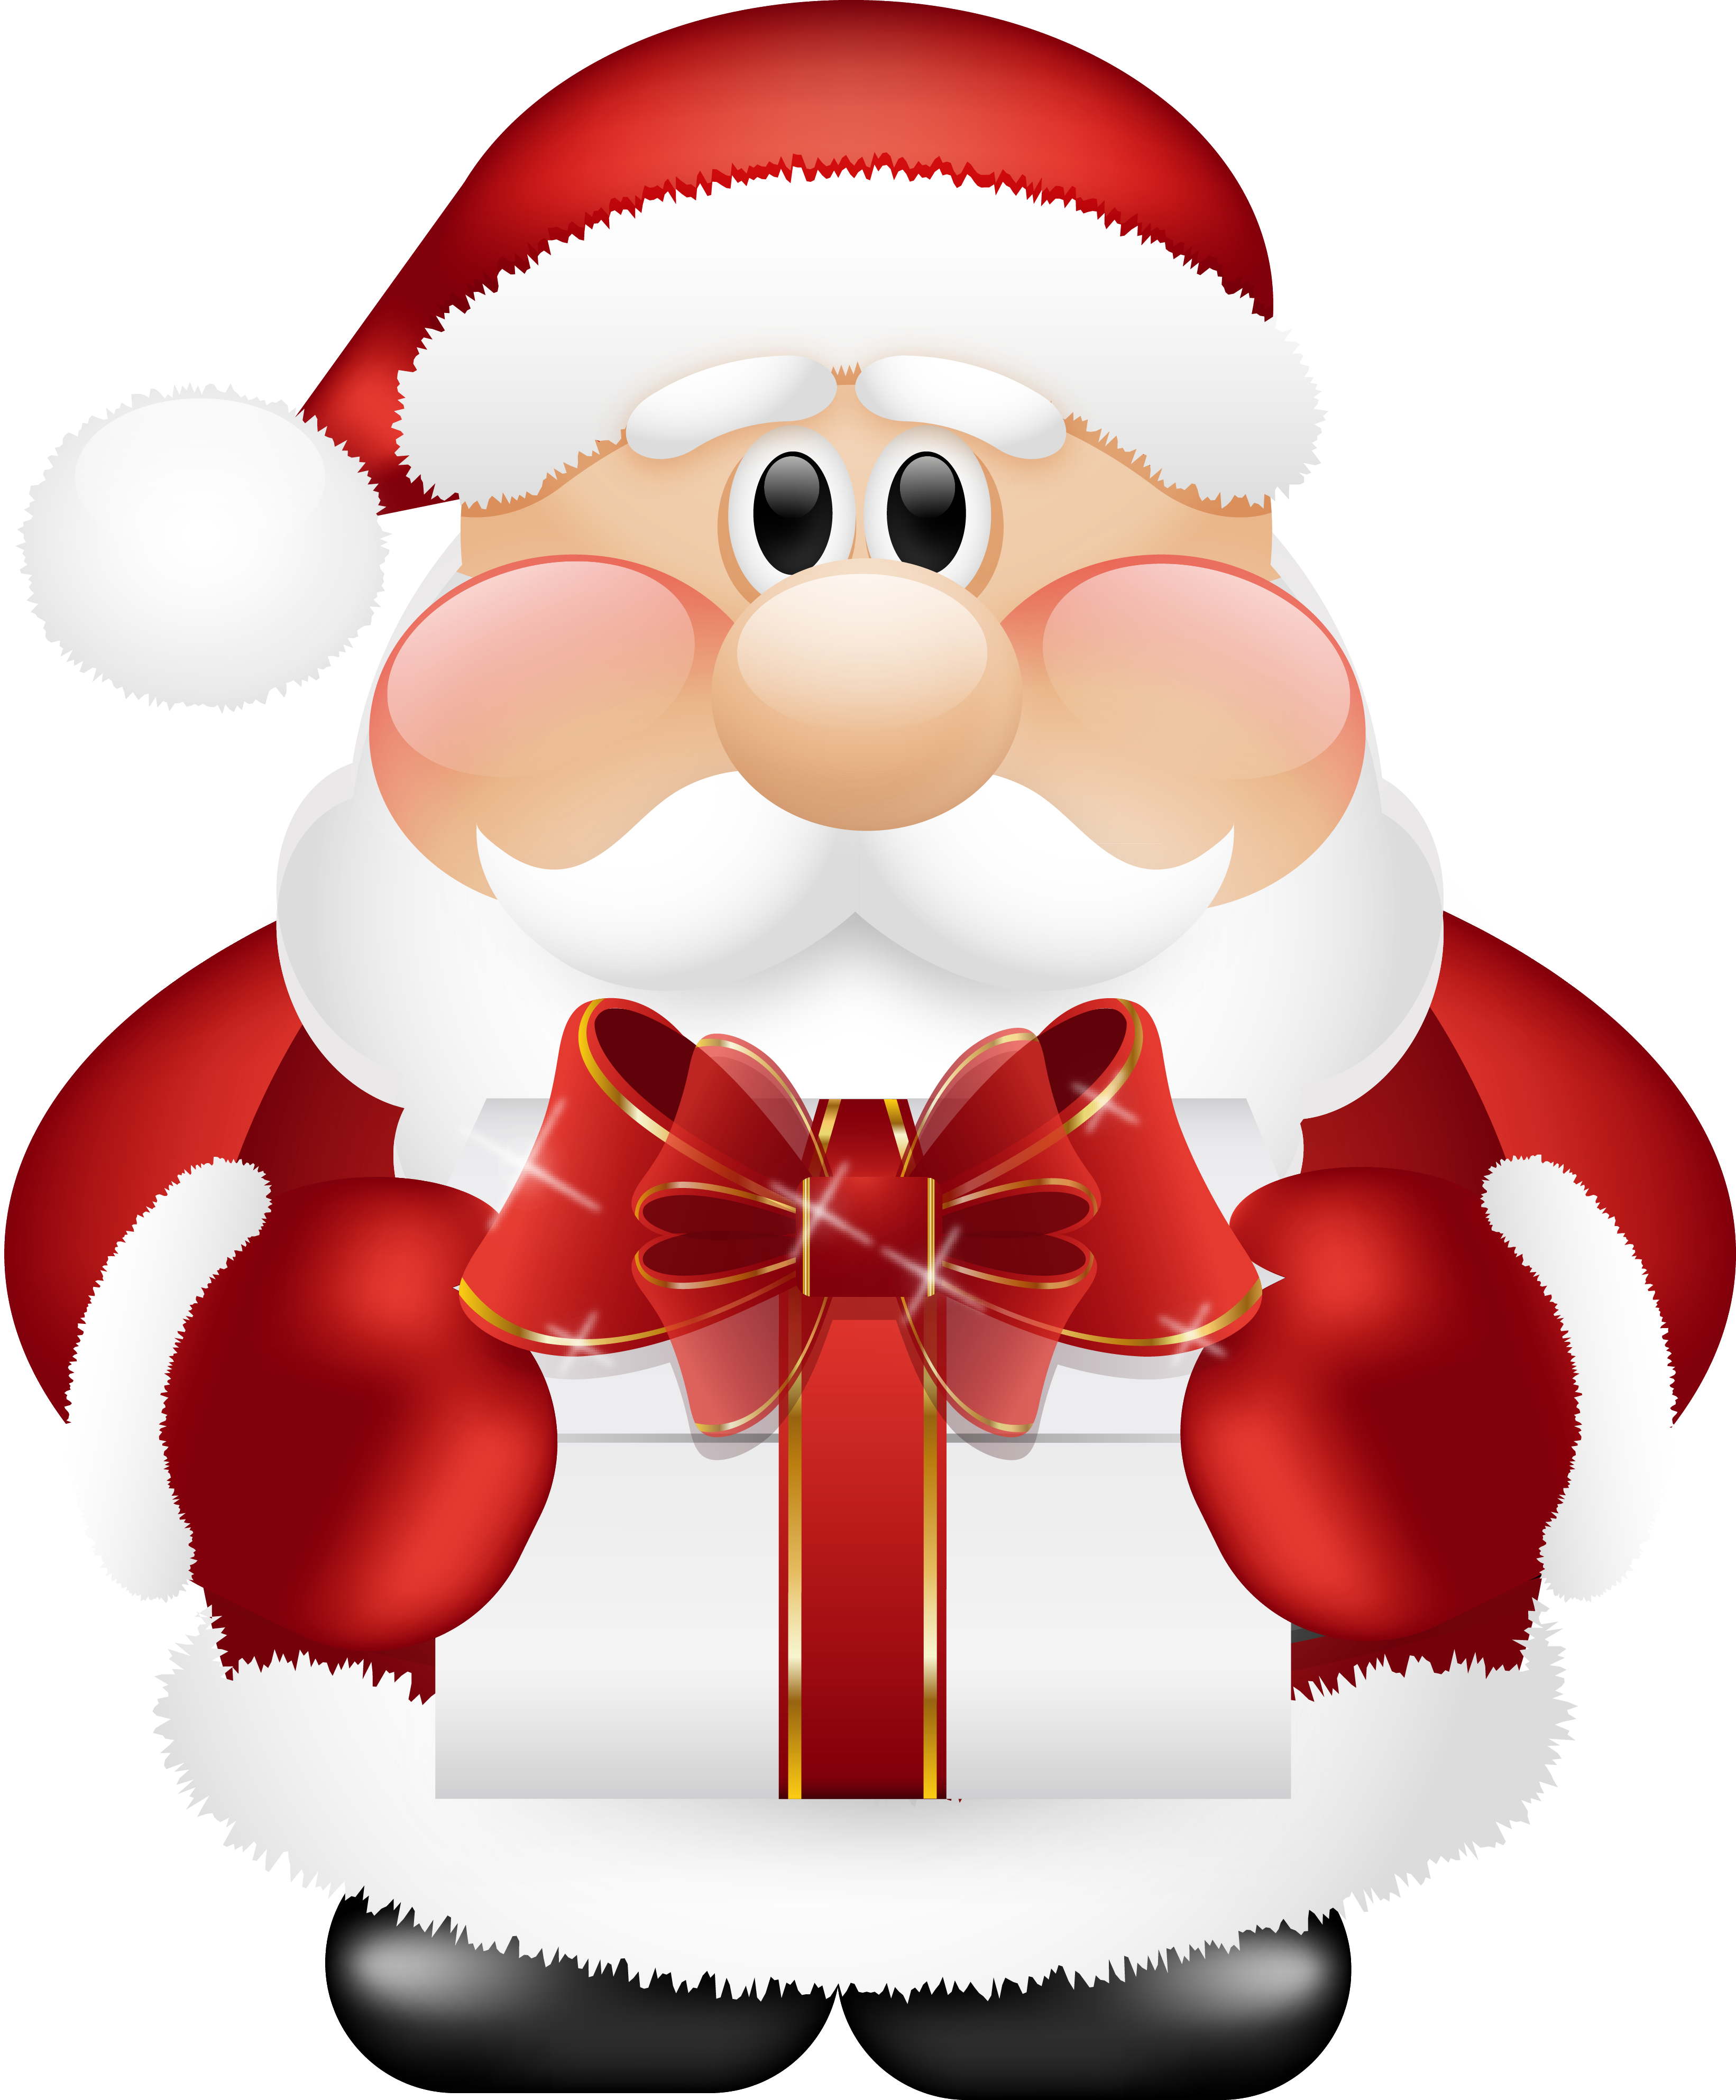 Santa clipart 2 . Gifts on .